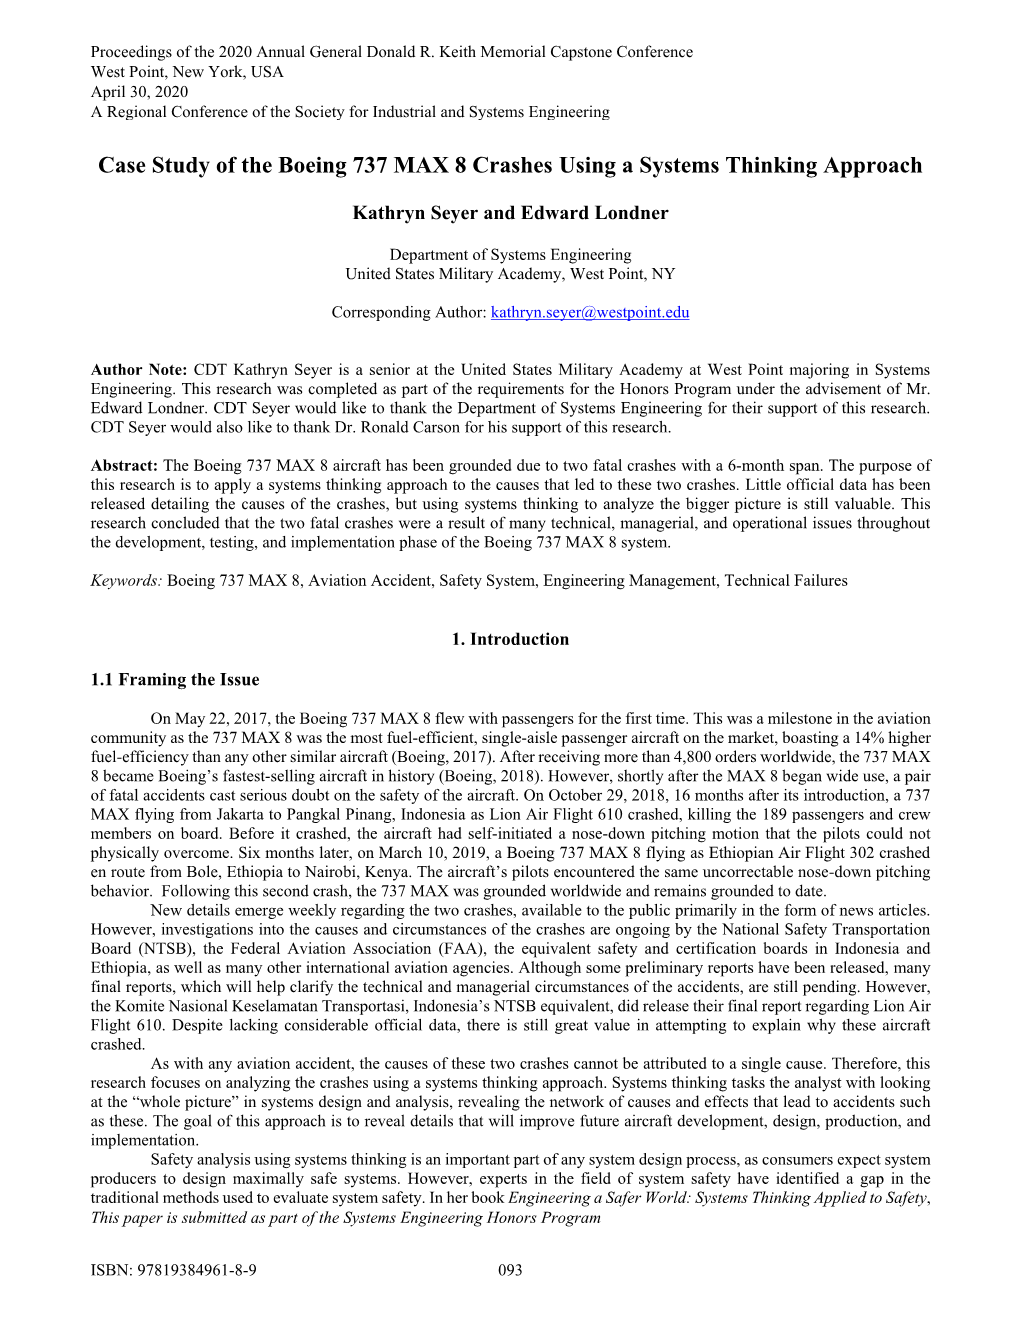 Case Study of the Boeing 737 MAX 8 Crashes Using a Systems Thinking Approach